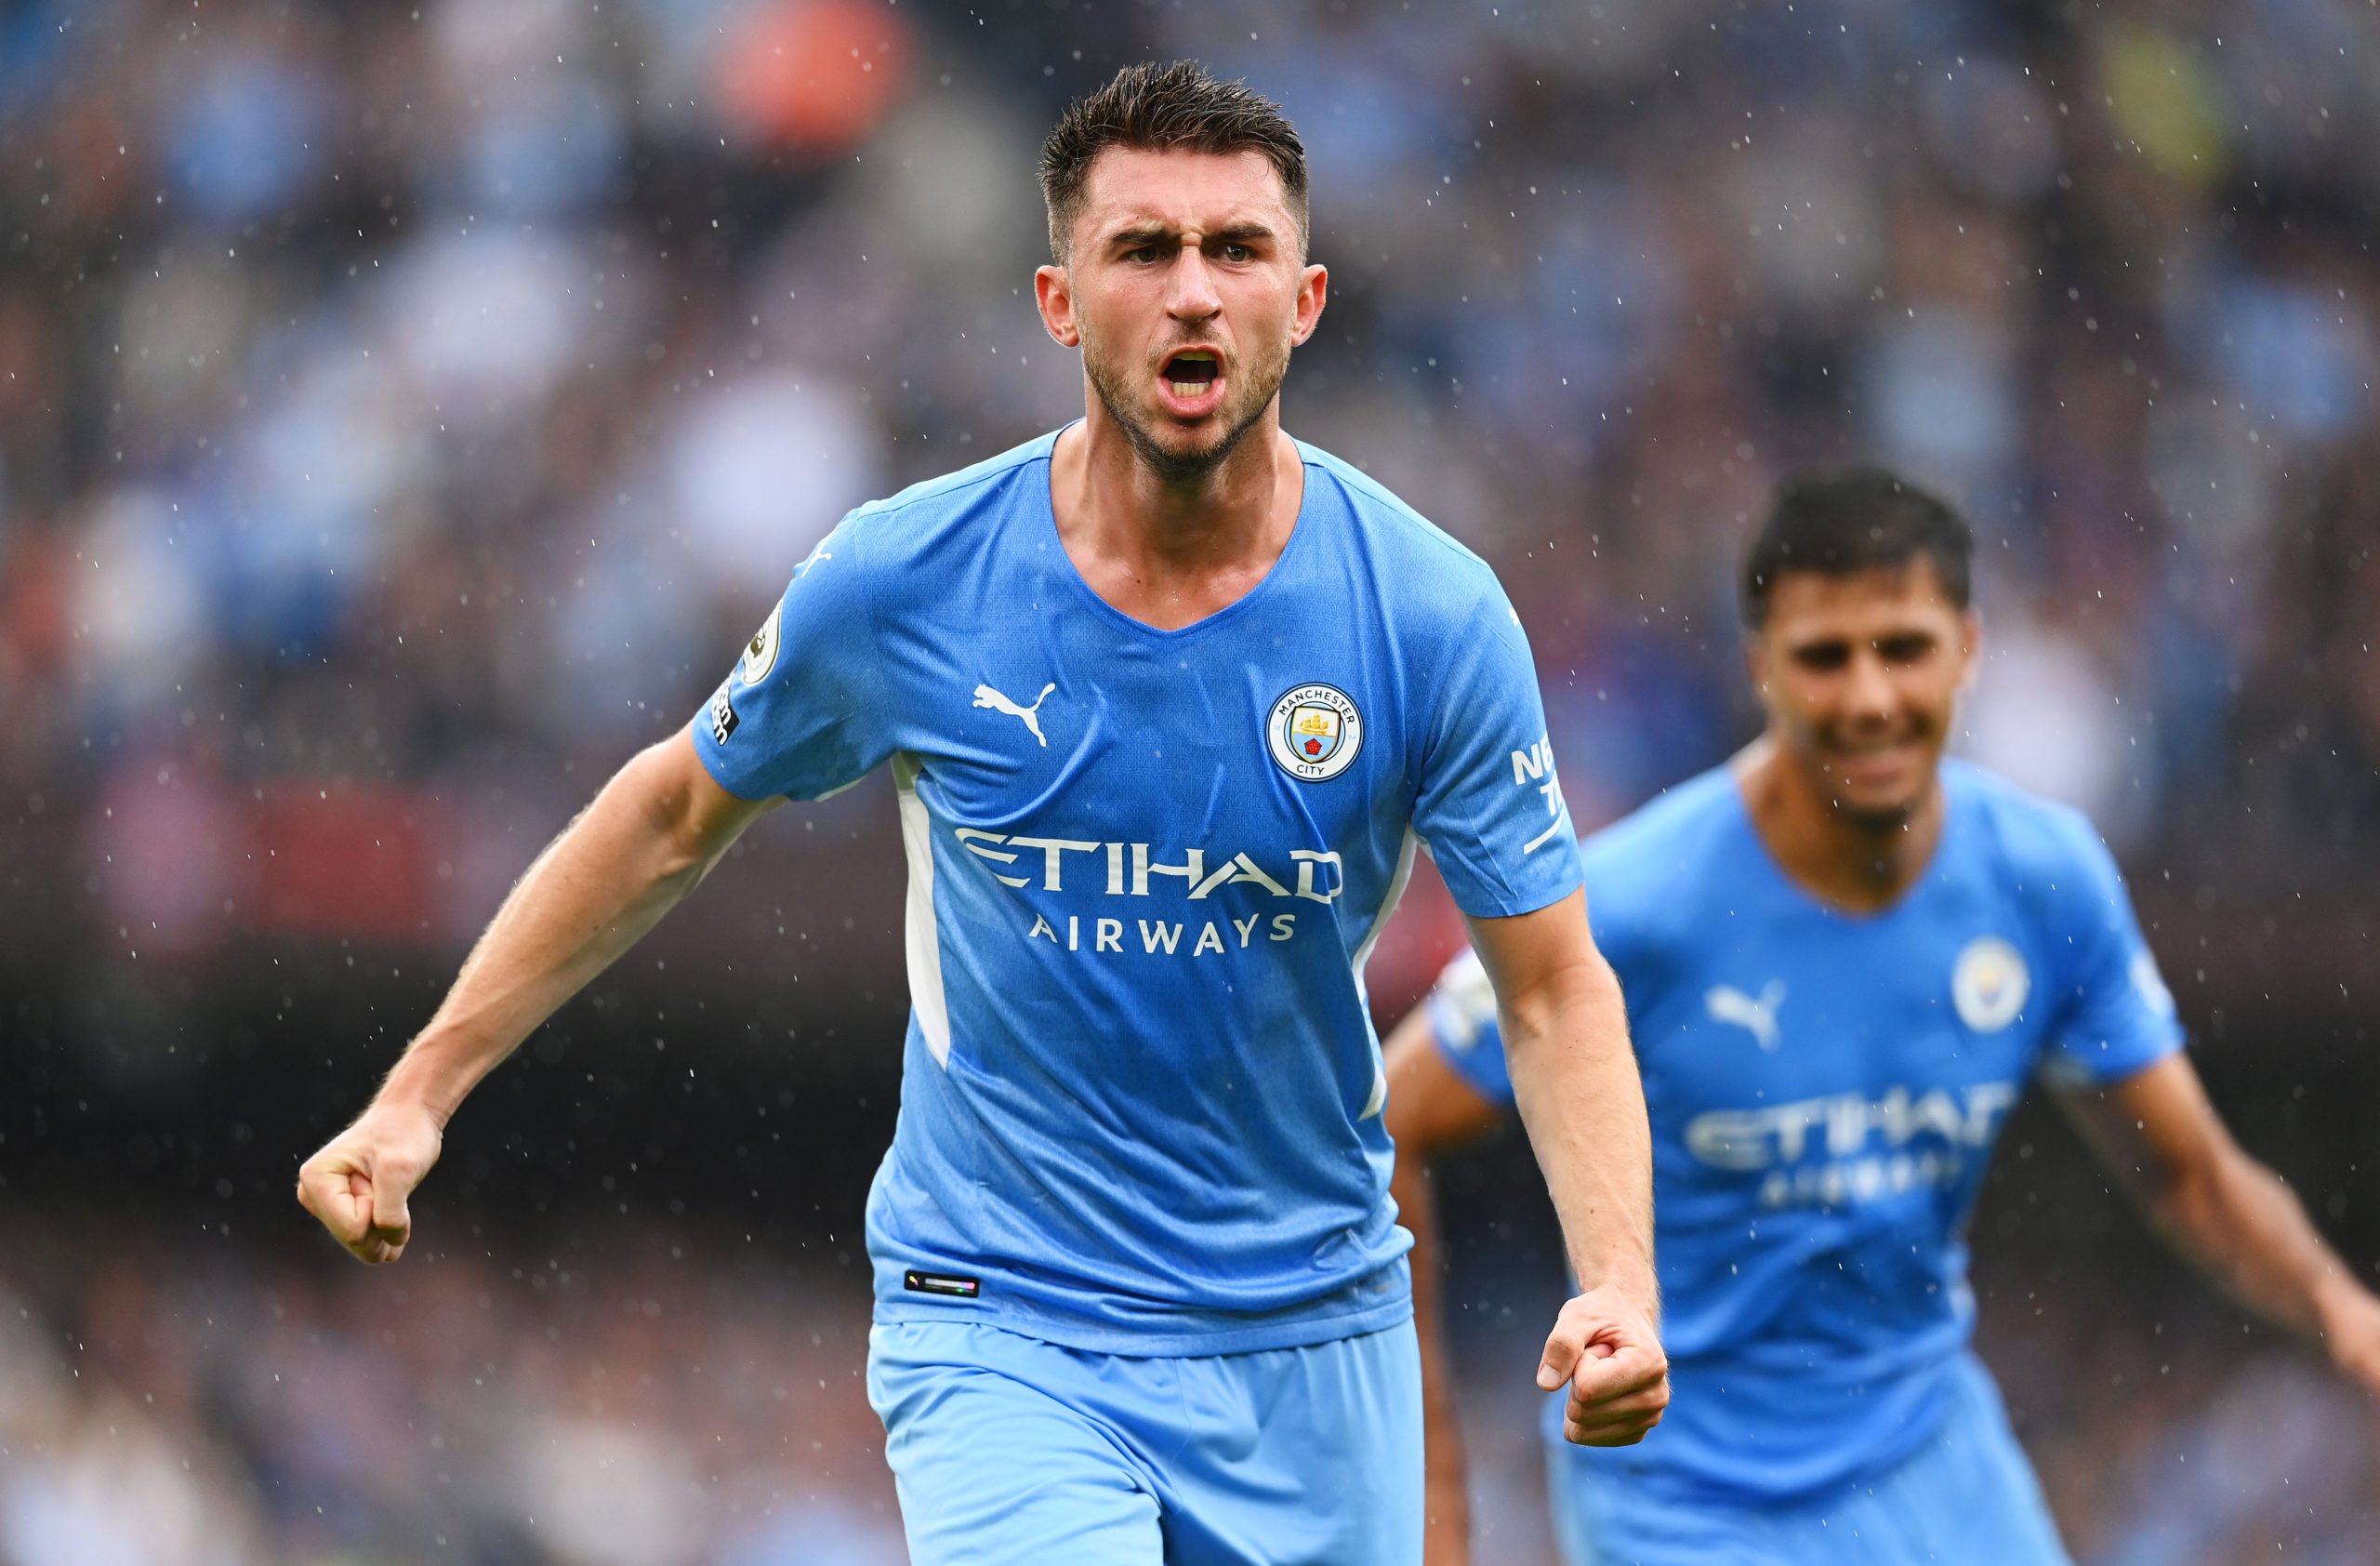 Real Madrid have expressed interest in Aymeric Laporte - A smart option.